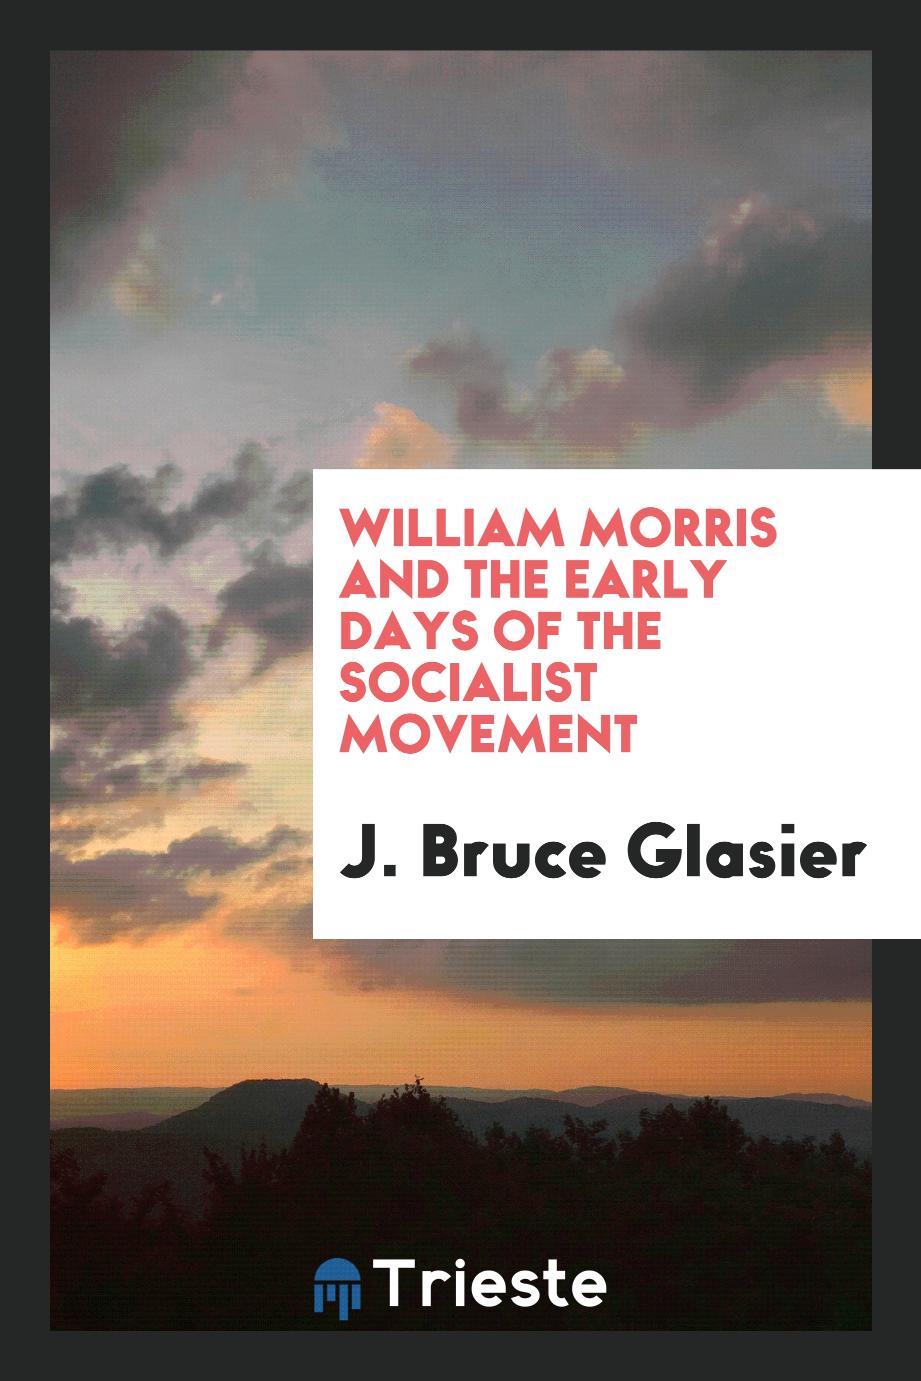 William Morris and the early days of the socialist movement